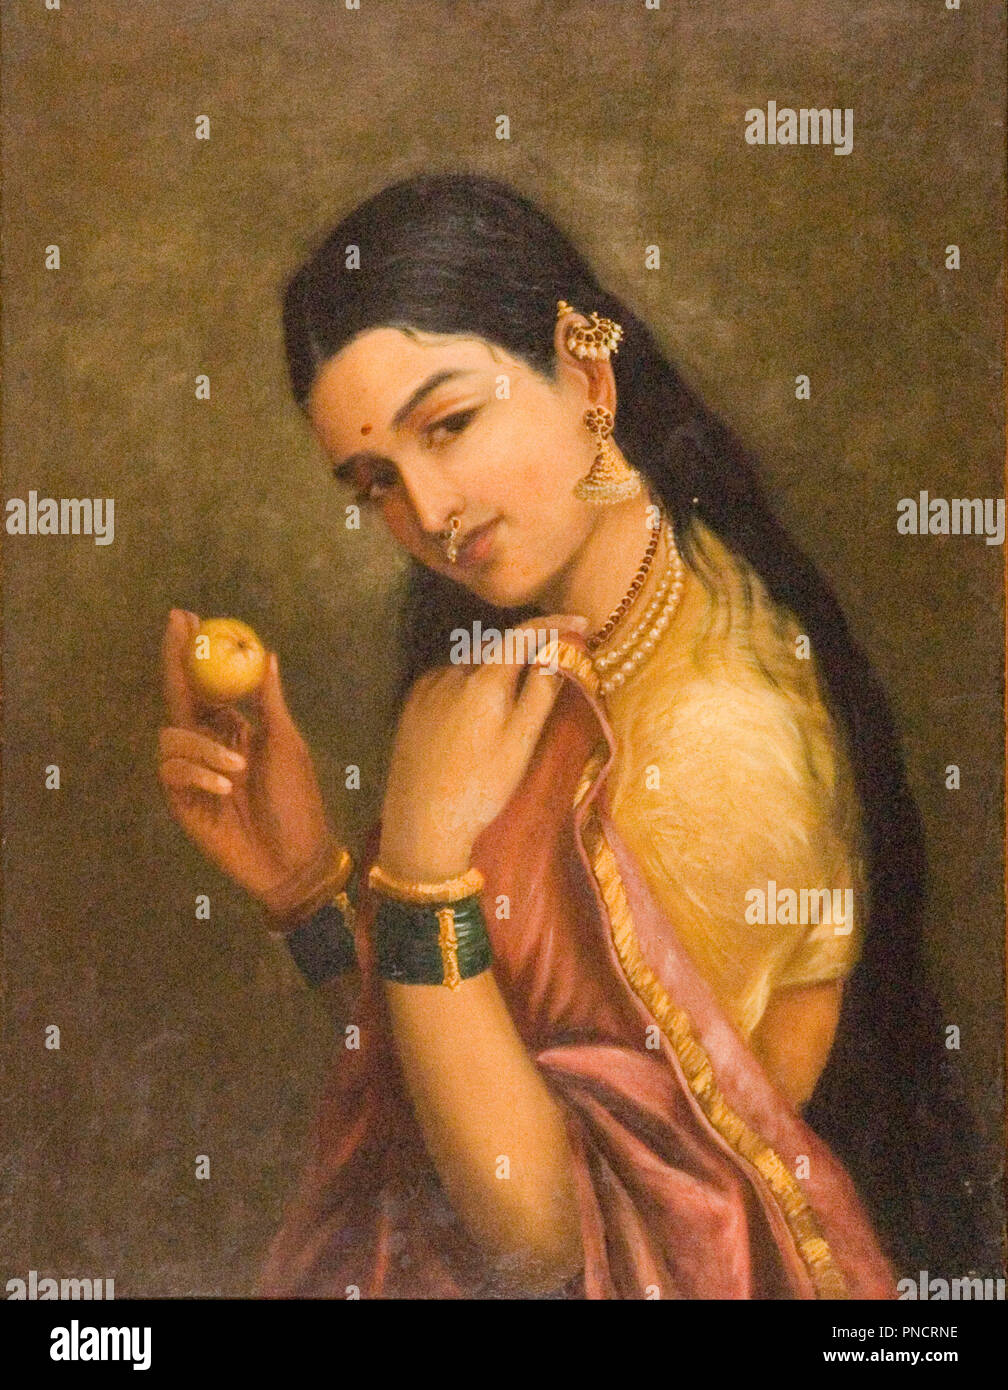 Woman Holding a Fruit. Date/Period: Late 19th century. Painting. Oil on canvas. Height: 600 mm (23.62 in); Width: 450 mm (17.71 in). Author: RAJA RAVI VARMA. Stock Photo